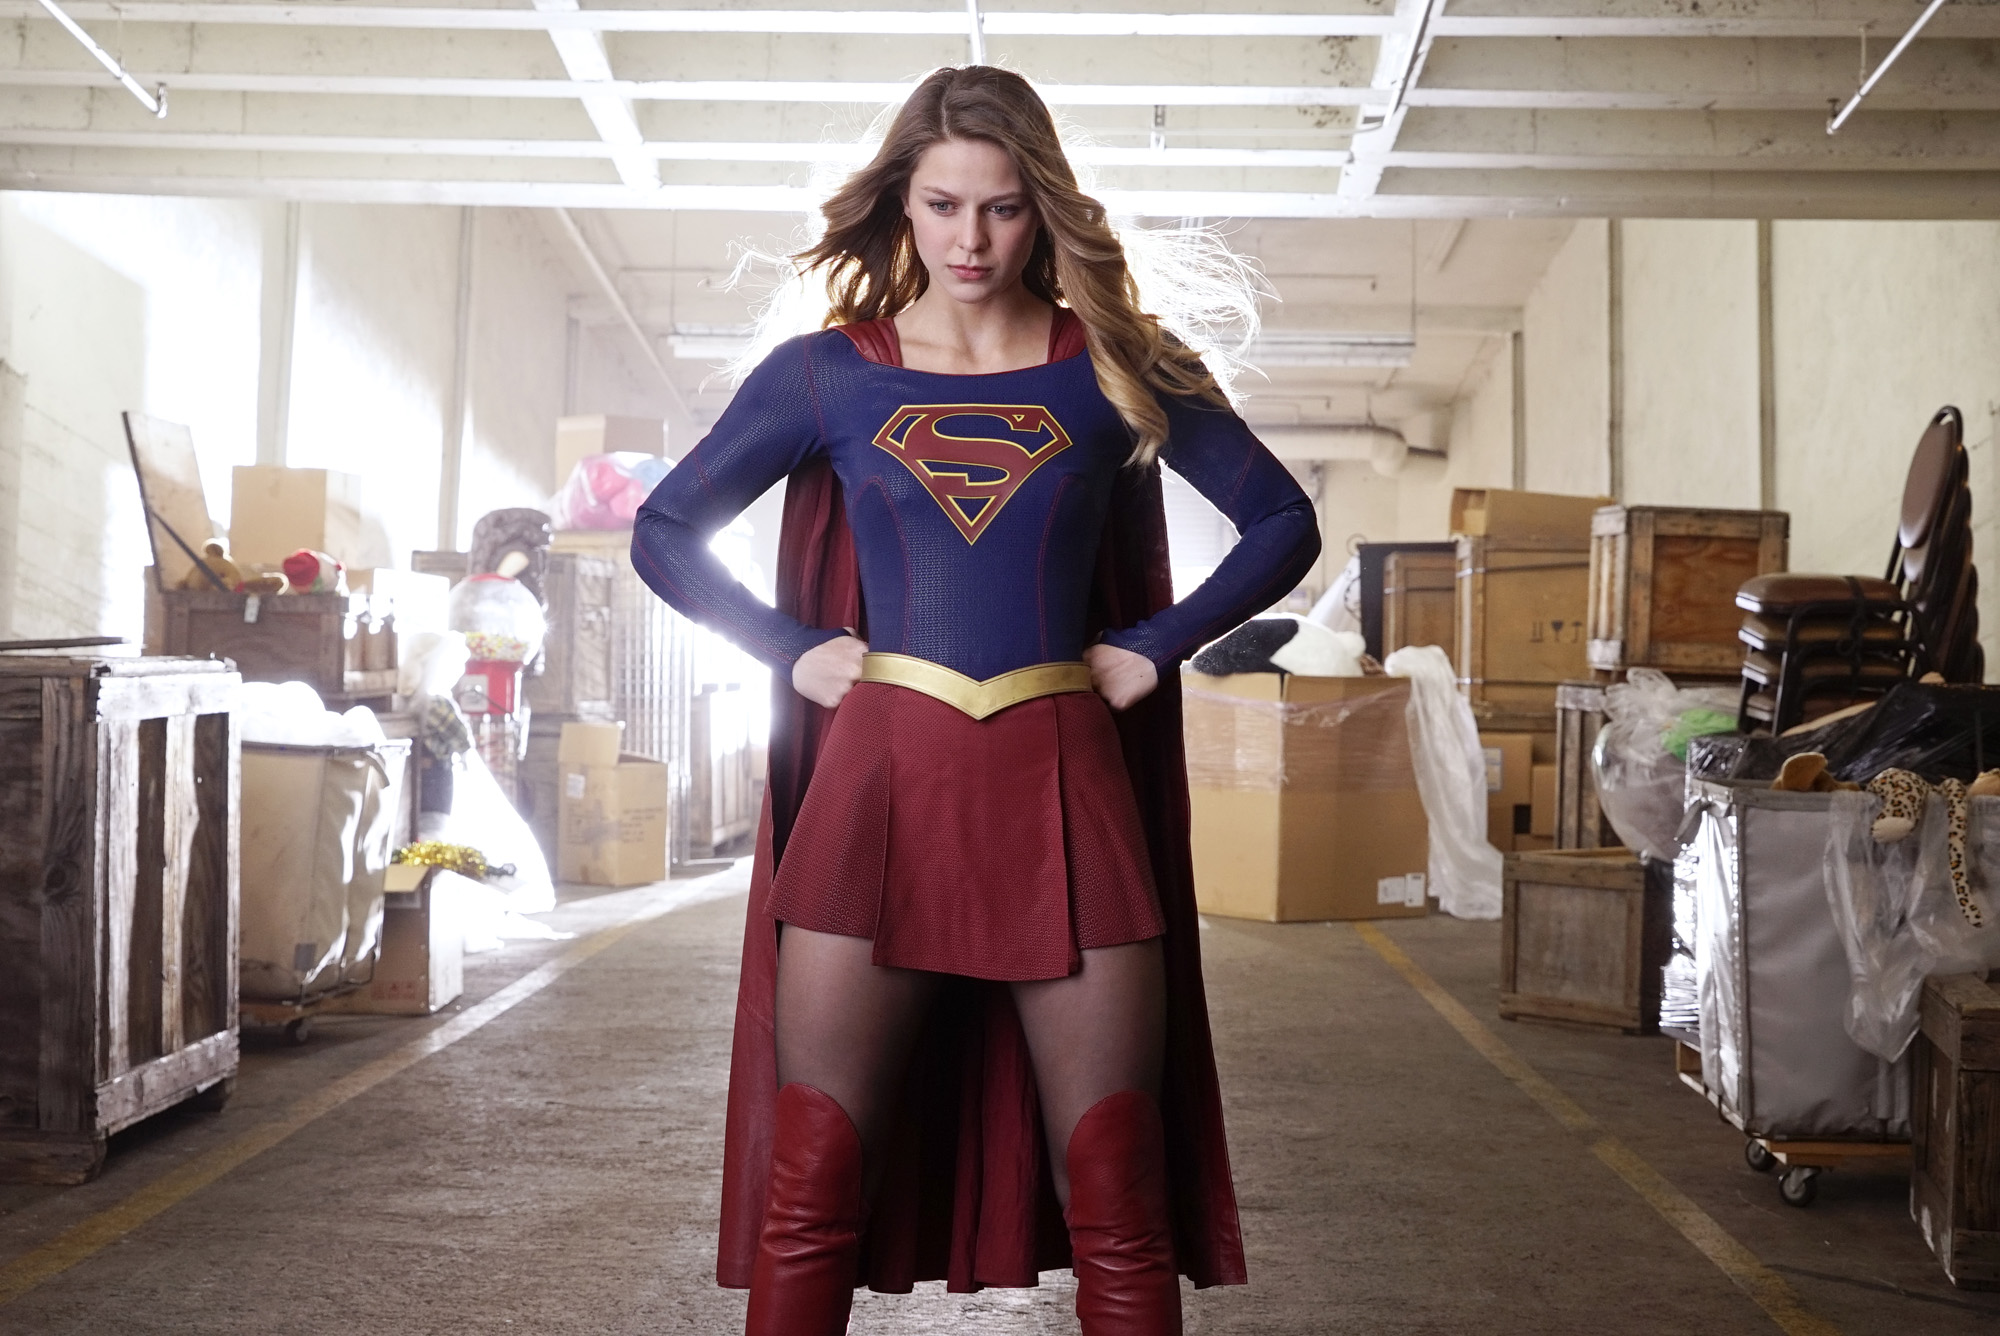 'Supergirl' Season 6 Episode 13 star Melissa Benoist poses in her Supergirl costume with her hands on her hips. The suit has a red skirt, red boots, red cape, and a blue long-sleeved shirt with the House of El crest on it.